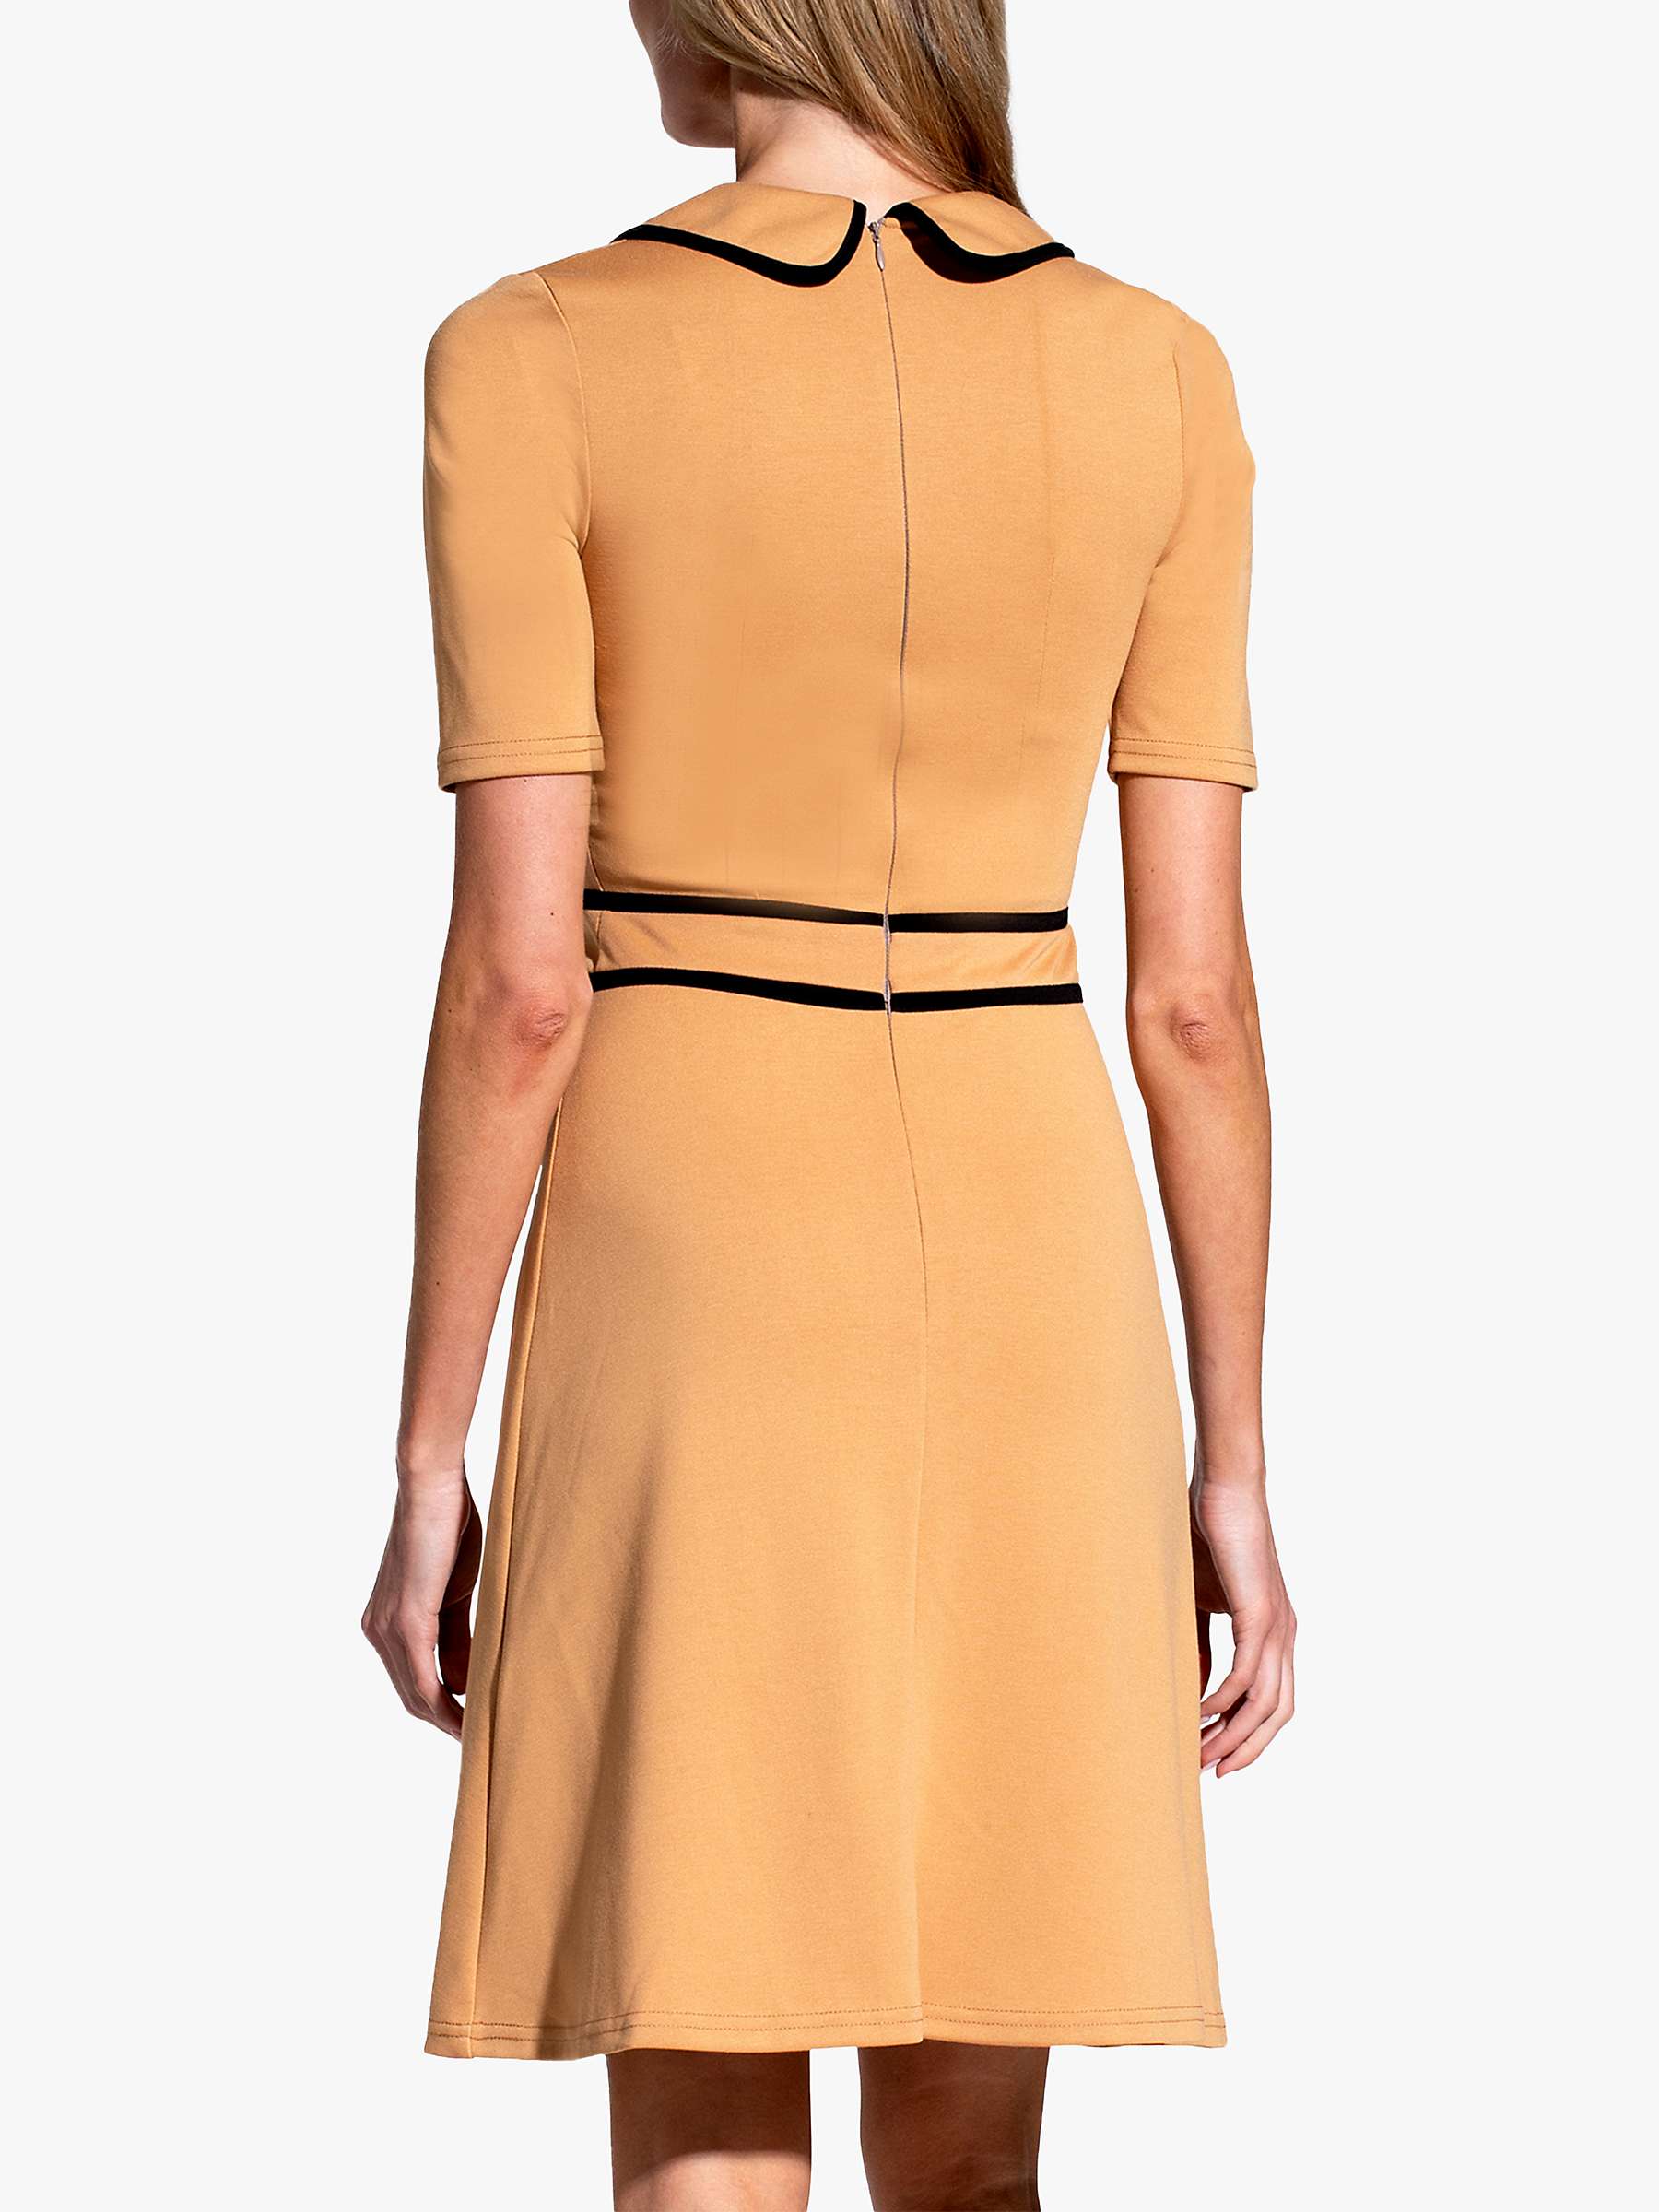 Buy HotSquash Piped Contrast Knee Length Dress Online at johnlewis.com